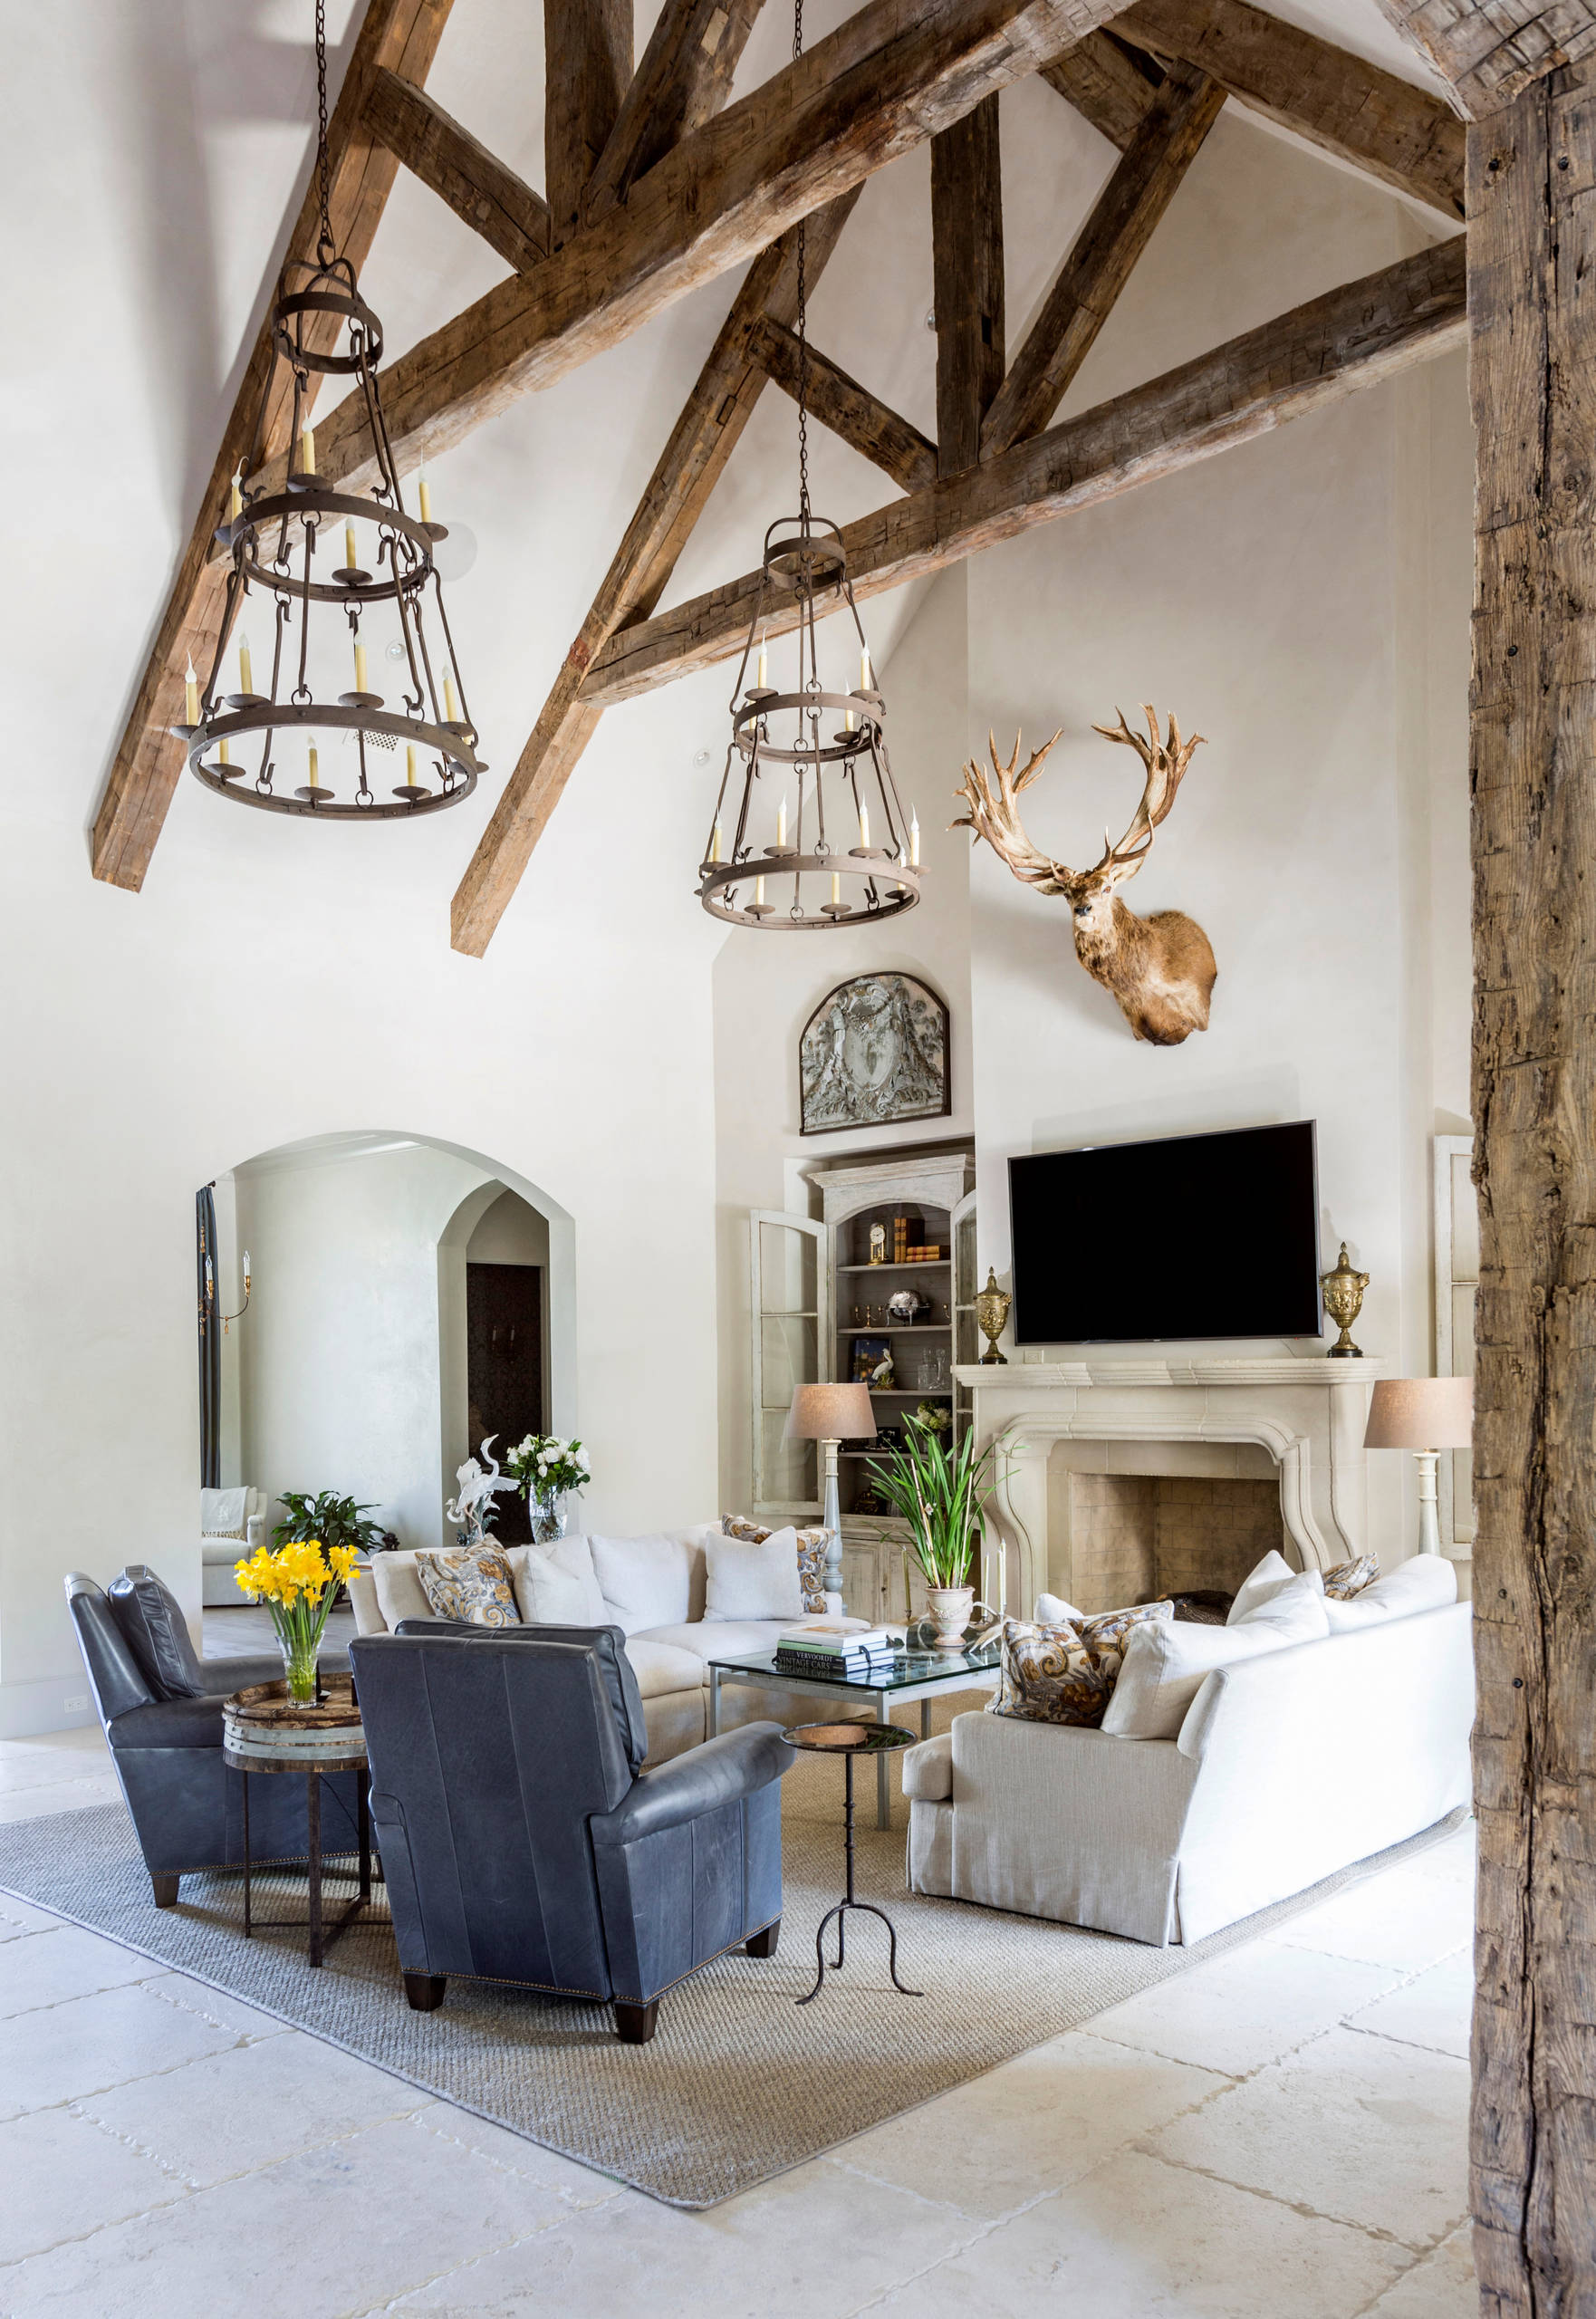 15 Rustic Home Decor Ideas for Your Living Room